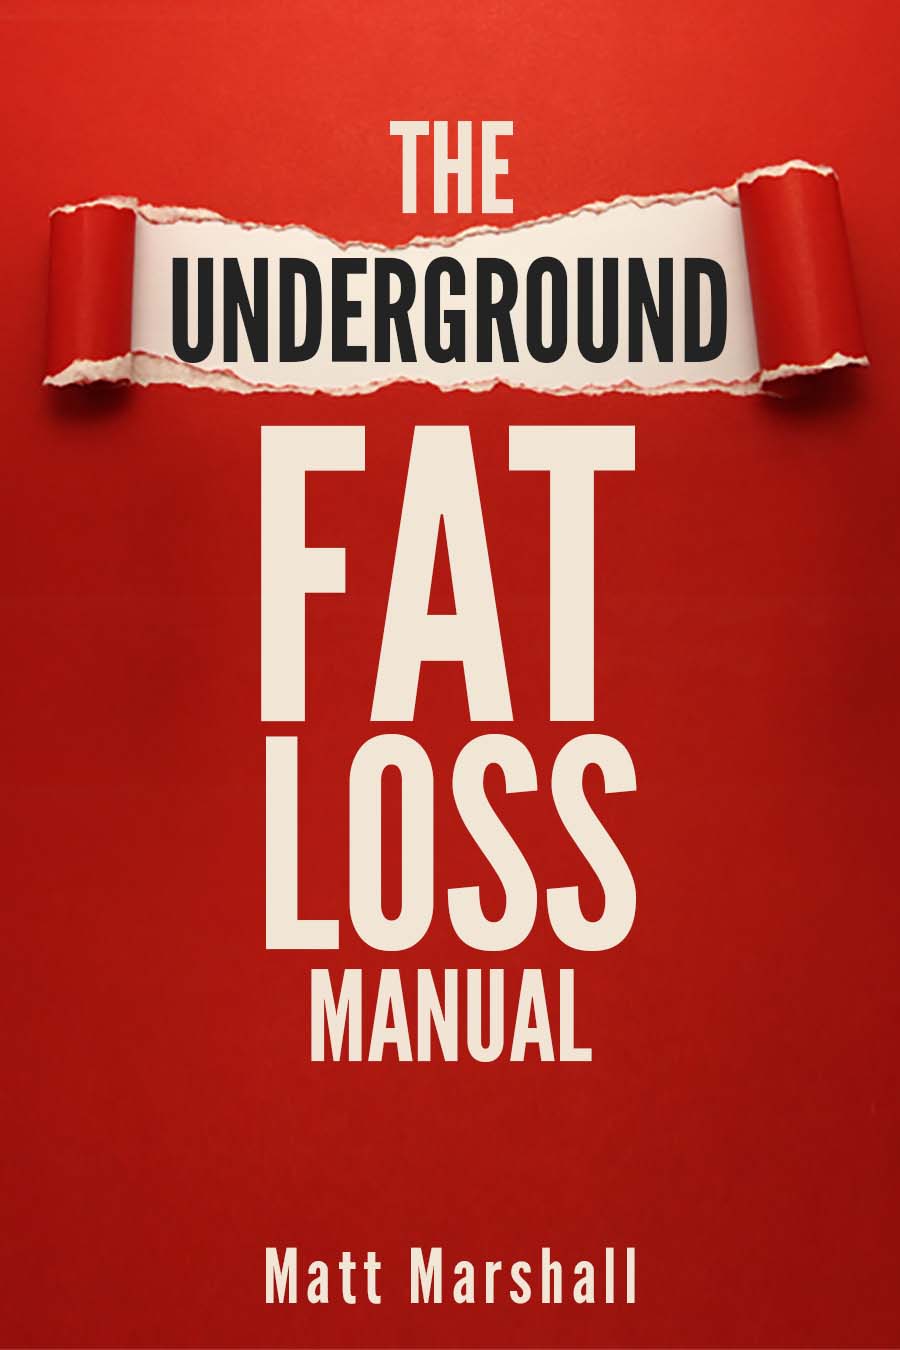 The Underground Fat Loss Manual is for anyone who wants a proven, developed-in-the-trenches 'field manual' for getting down to 6-8% body fat levels (12-16% for women) and staying that lean year-round with minimal effort.